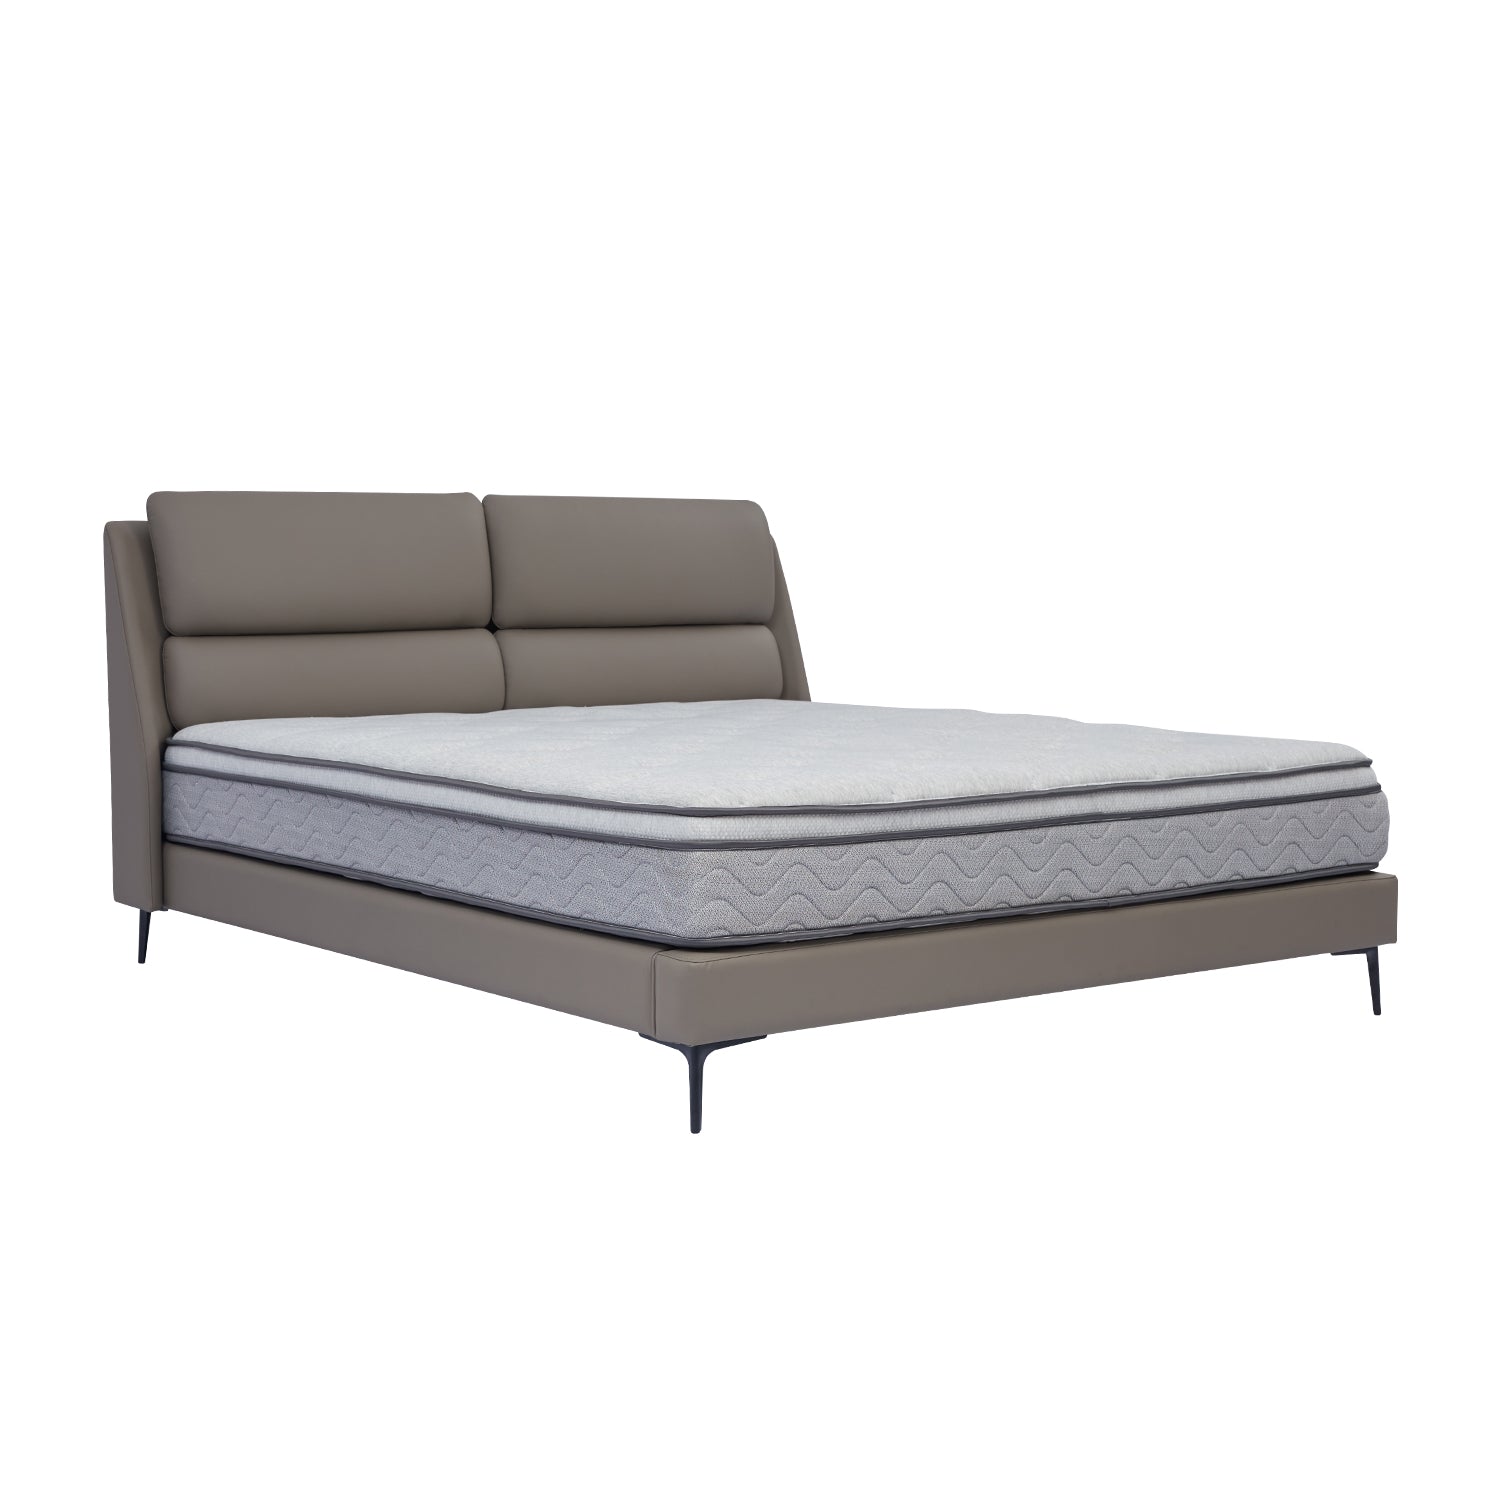 DeRUCCI Bed Frame BOC1 - 019 with grey upholstered headboard and base, comfortable mattress, and sleek metal legs suitable for a modern bedroom